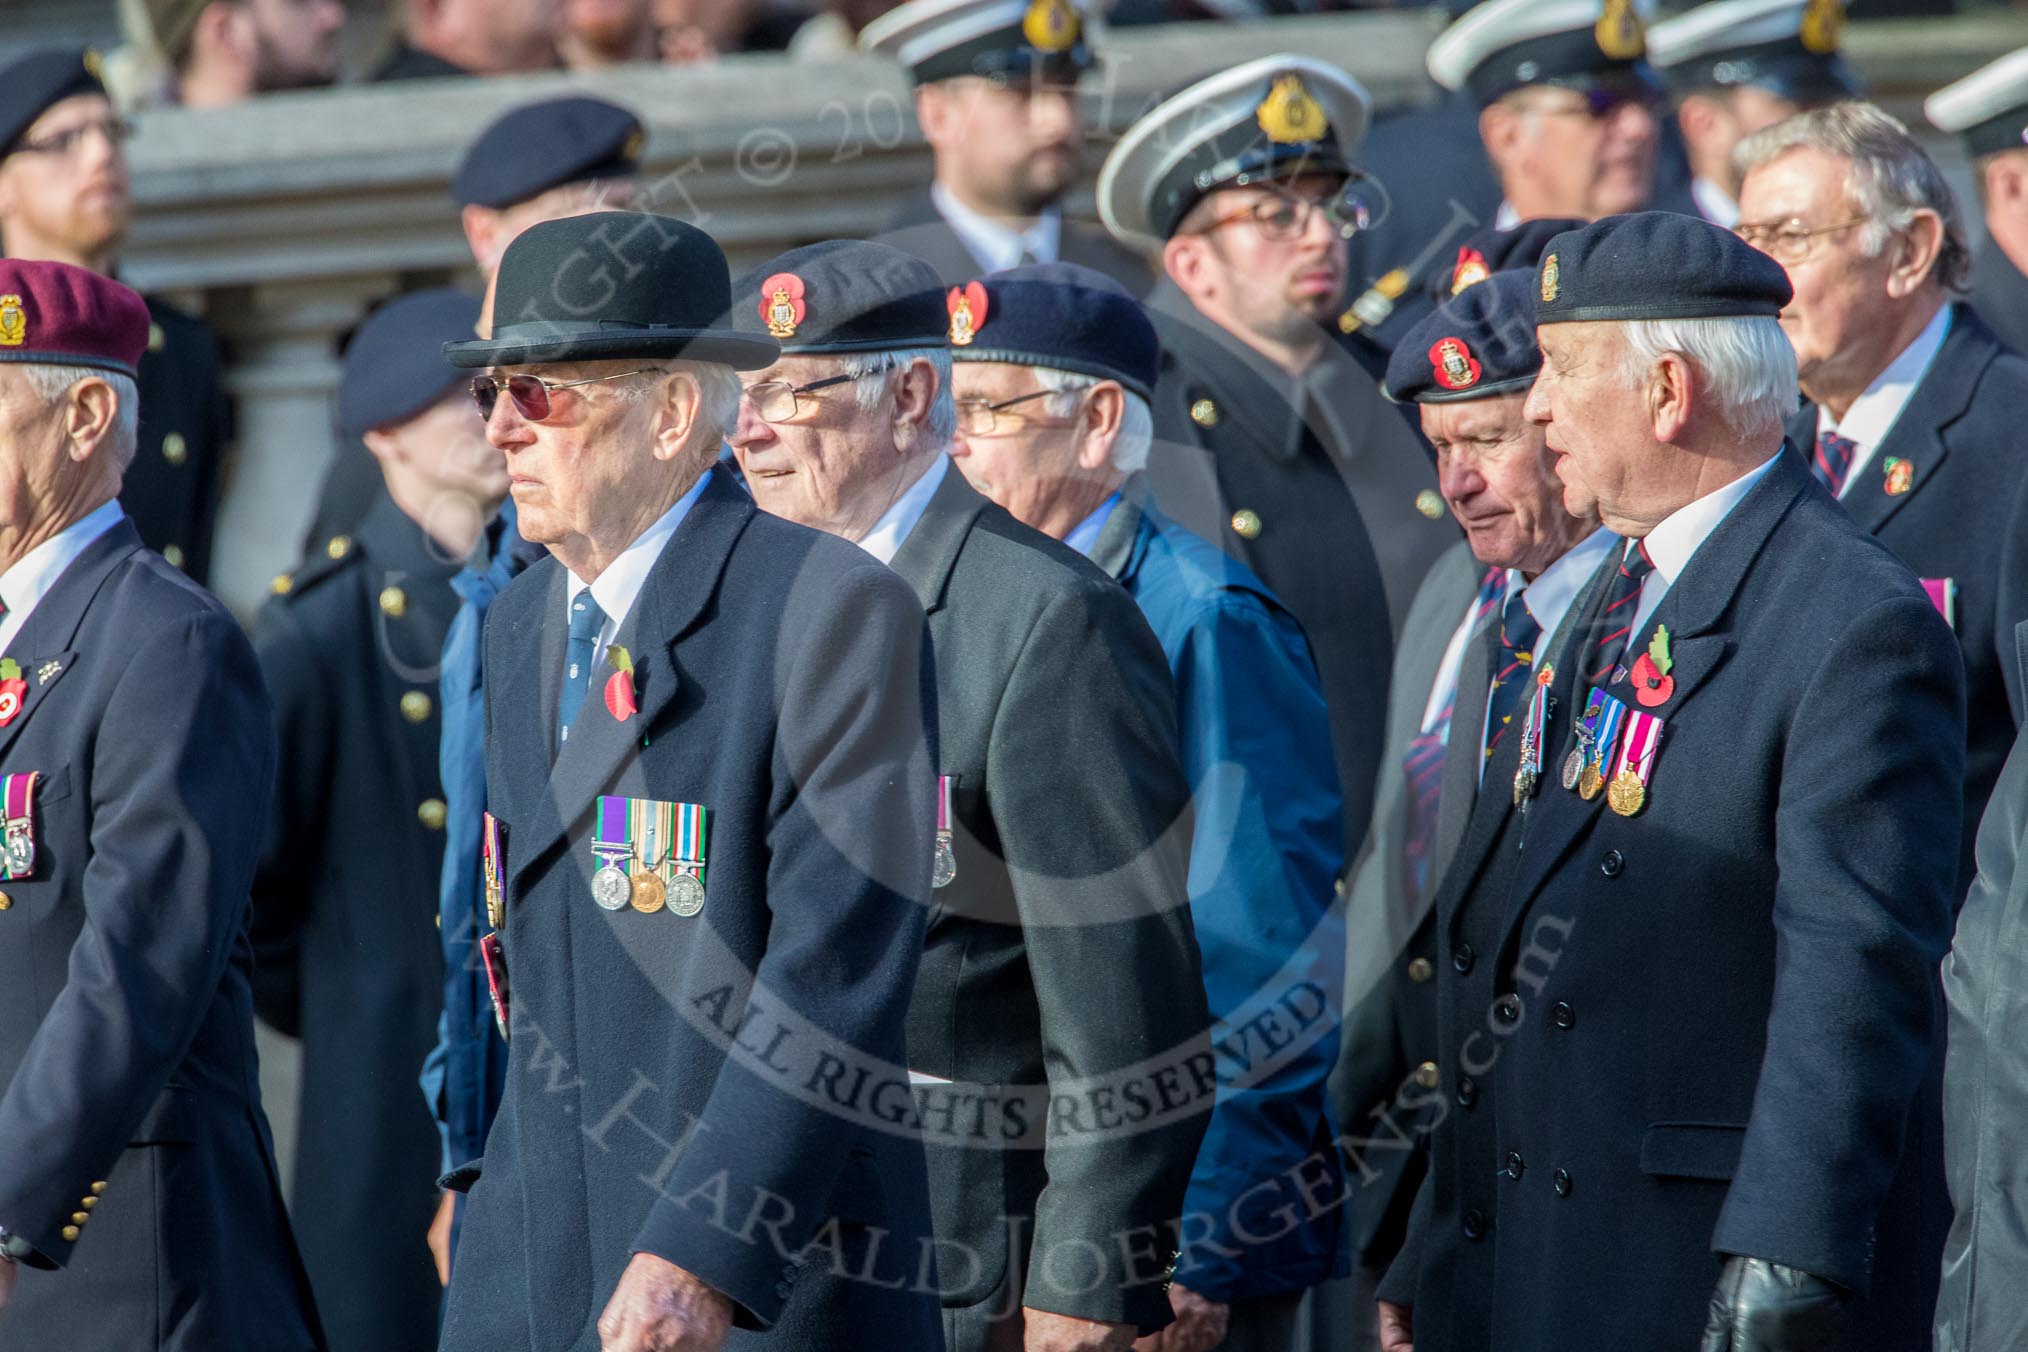 Royal Army Ordnance Corps Association (Group B1, 33 members) during the Royal British Legion March Past on Remembrance Sunday at the Cenotaph, Whitehall, Westminster, London, 11 November 2018, 12:05.